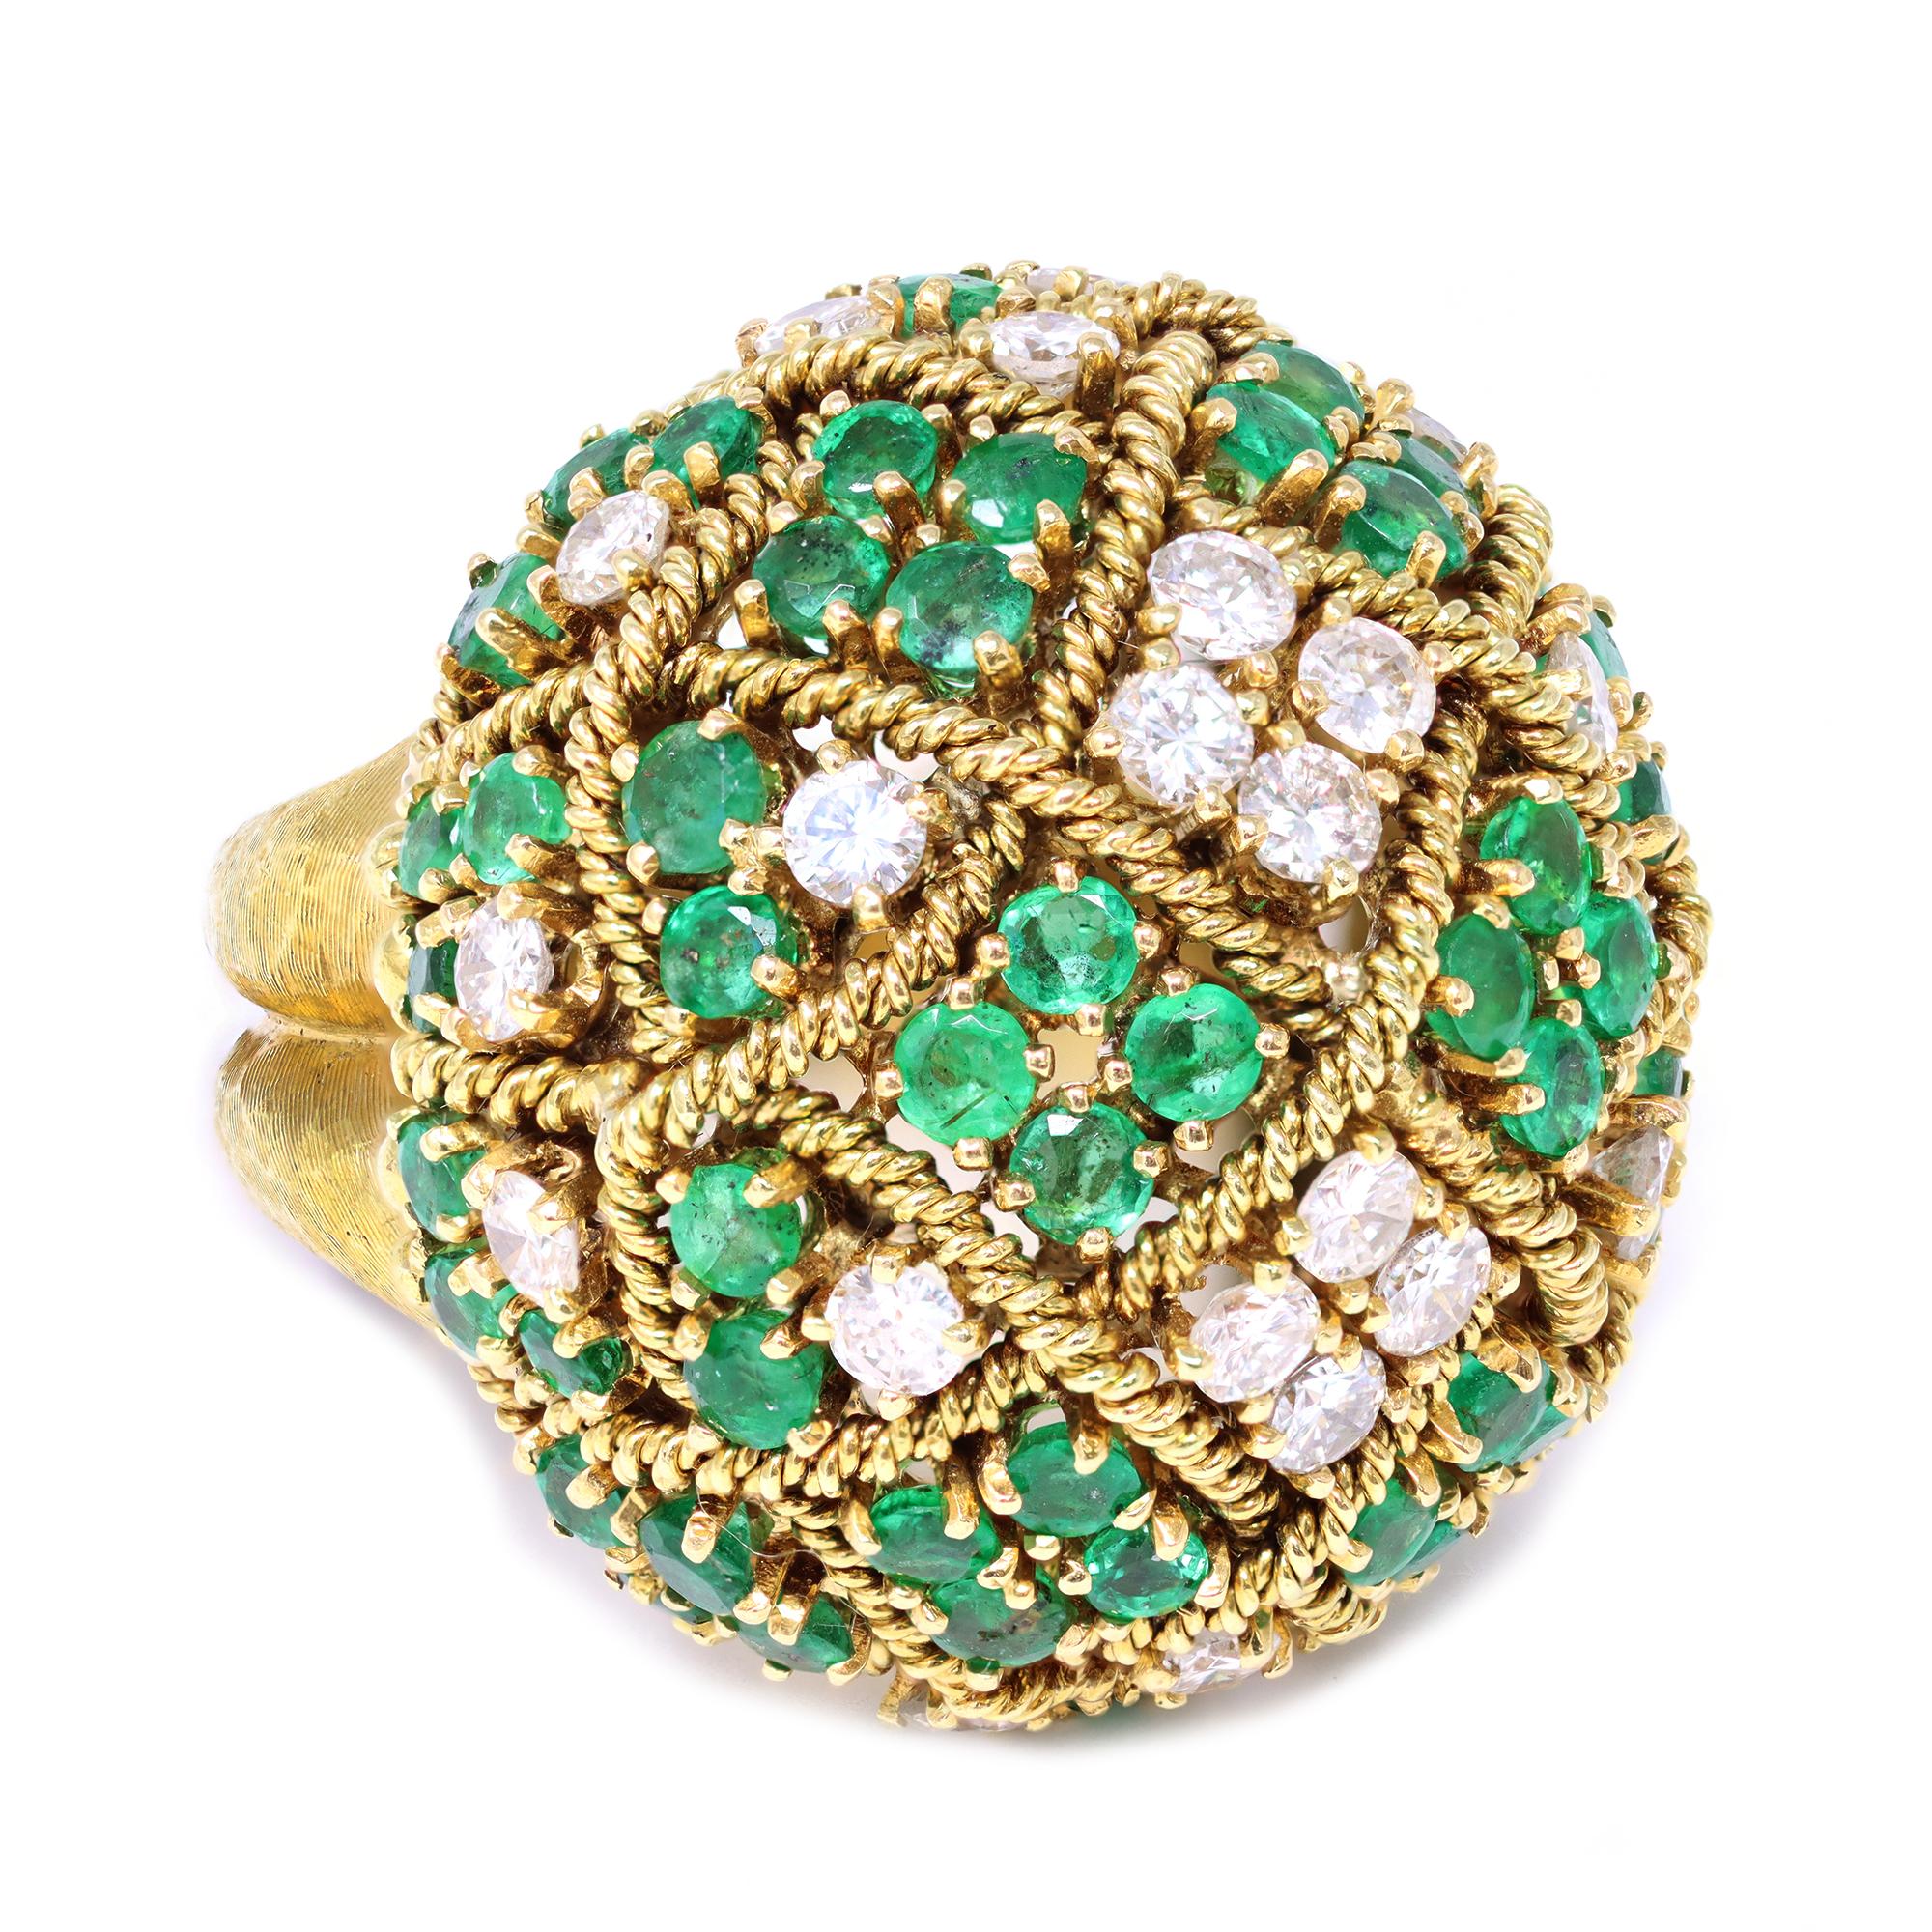 A fantastic Dome design ring circa 1960 featuring a crisscross emerald and diamond design. The ring is set in 18 Karat yellow gold. 
The estimated weight of the diamonds is 1.80 carats GH color VS clarity. The estimated weight of the emeralds is